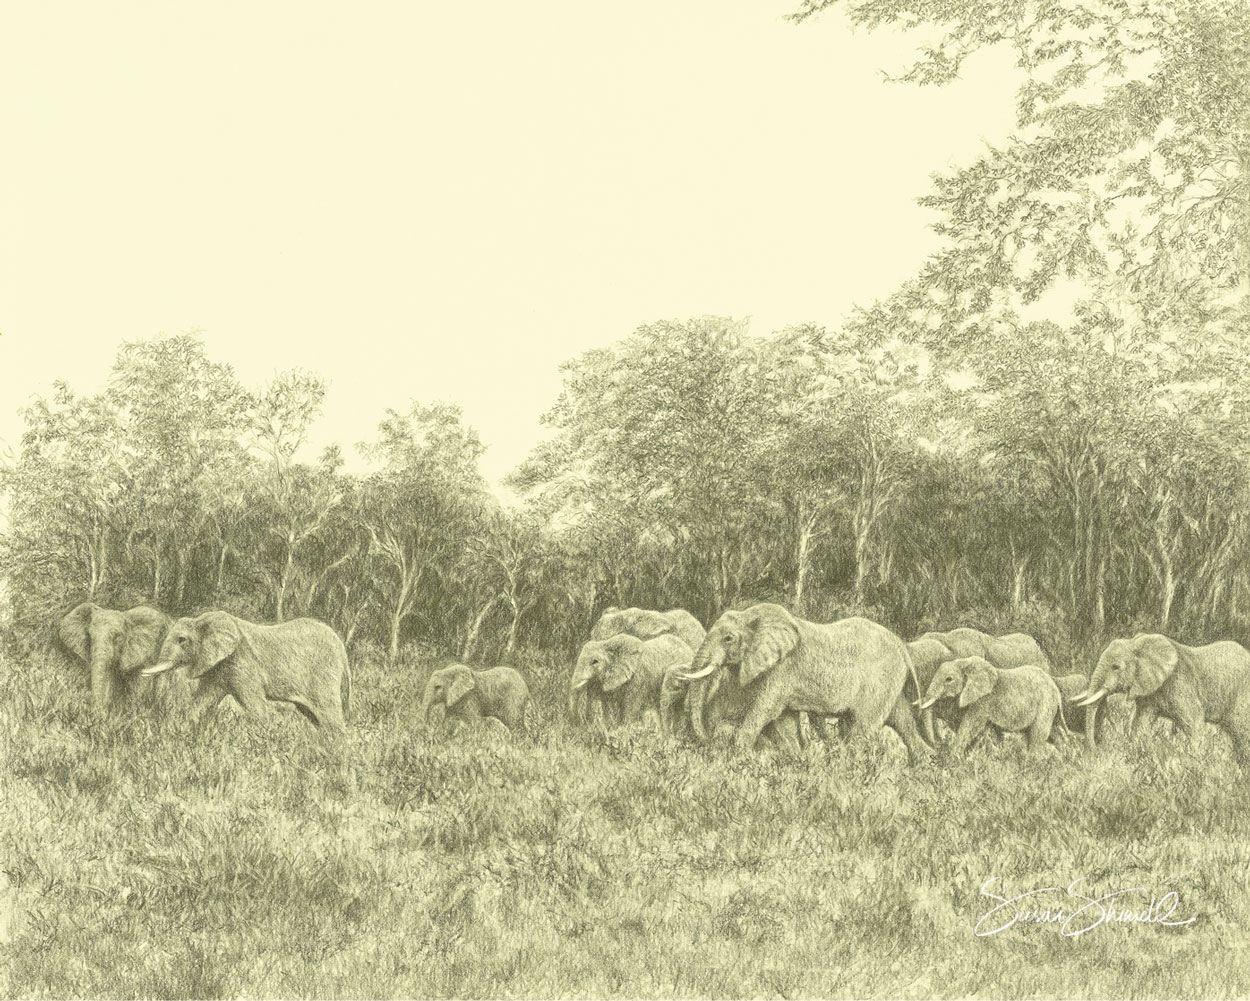 Family portrait of elephants - drawn in graphite pencil